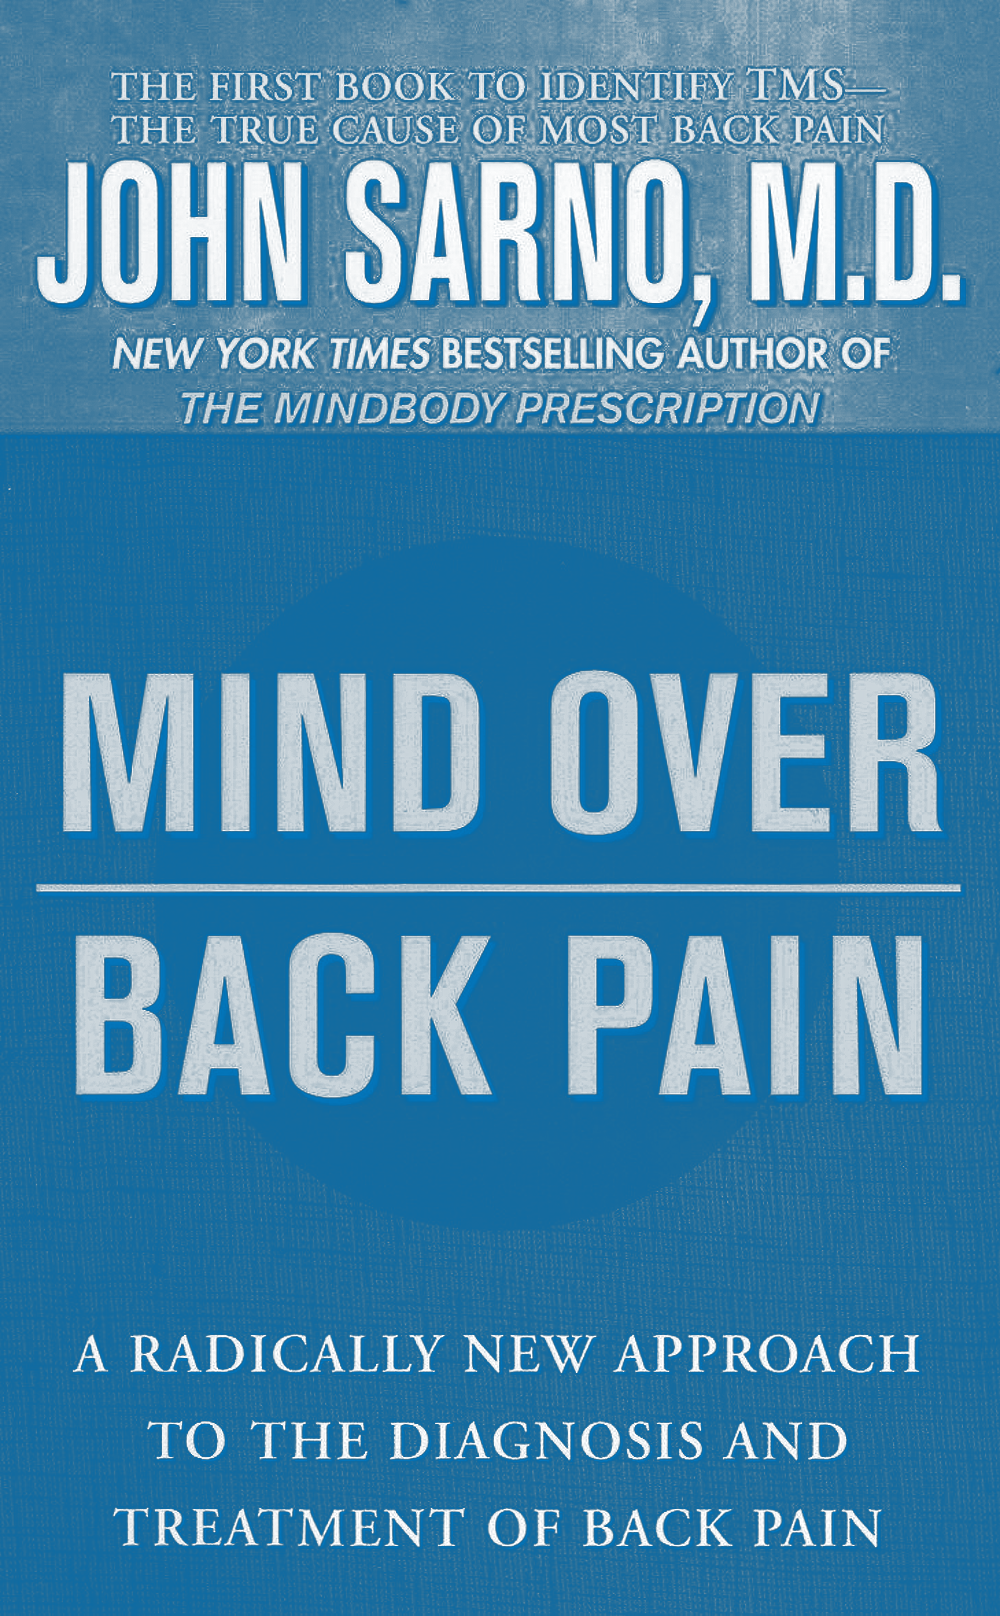 Cover of the book Mind Over Back Pain by Dr. John Sarno.